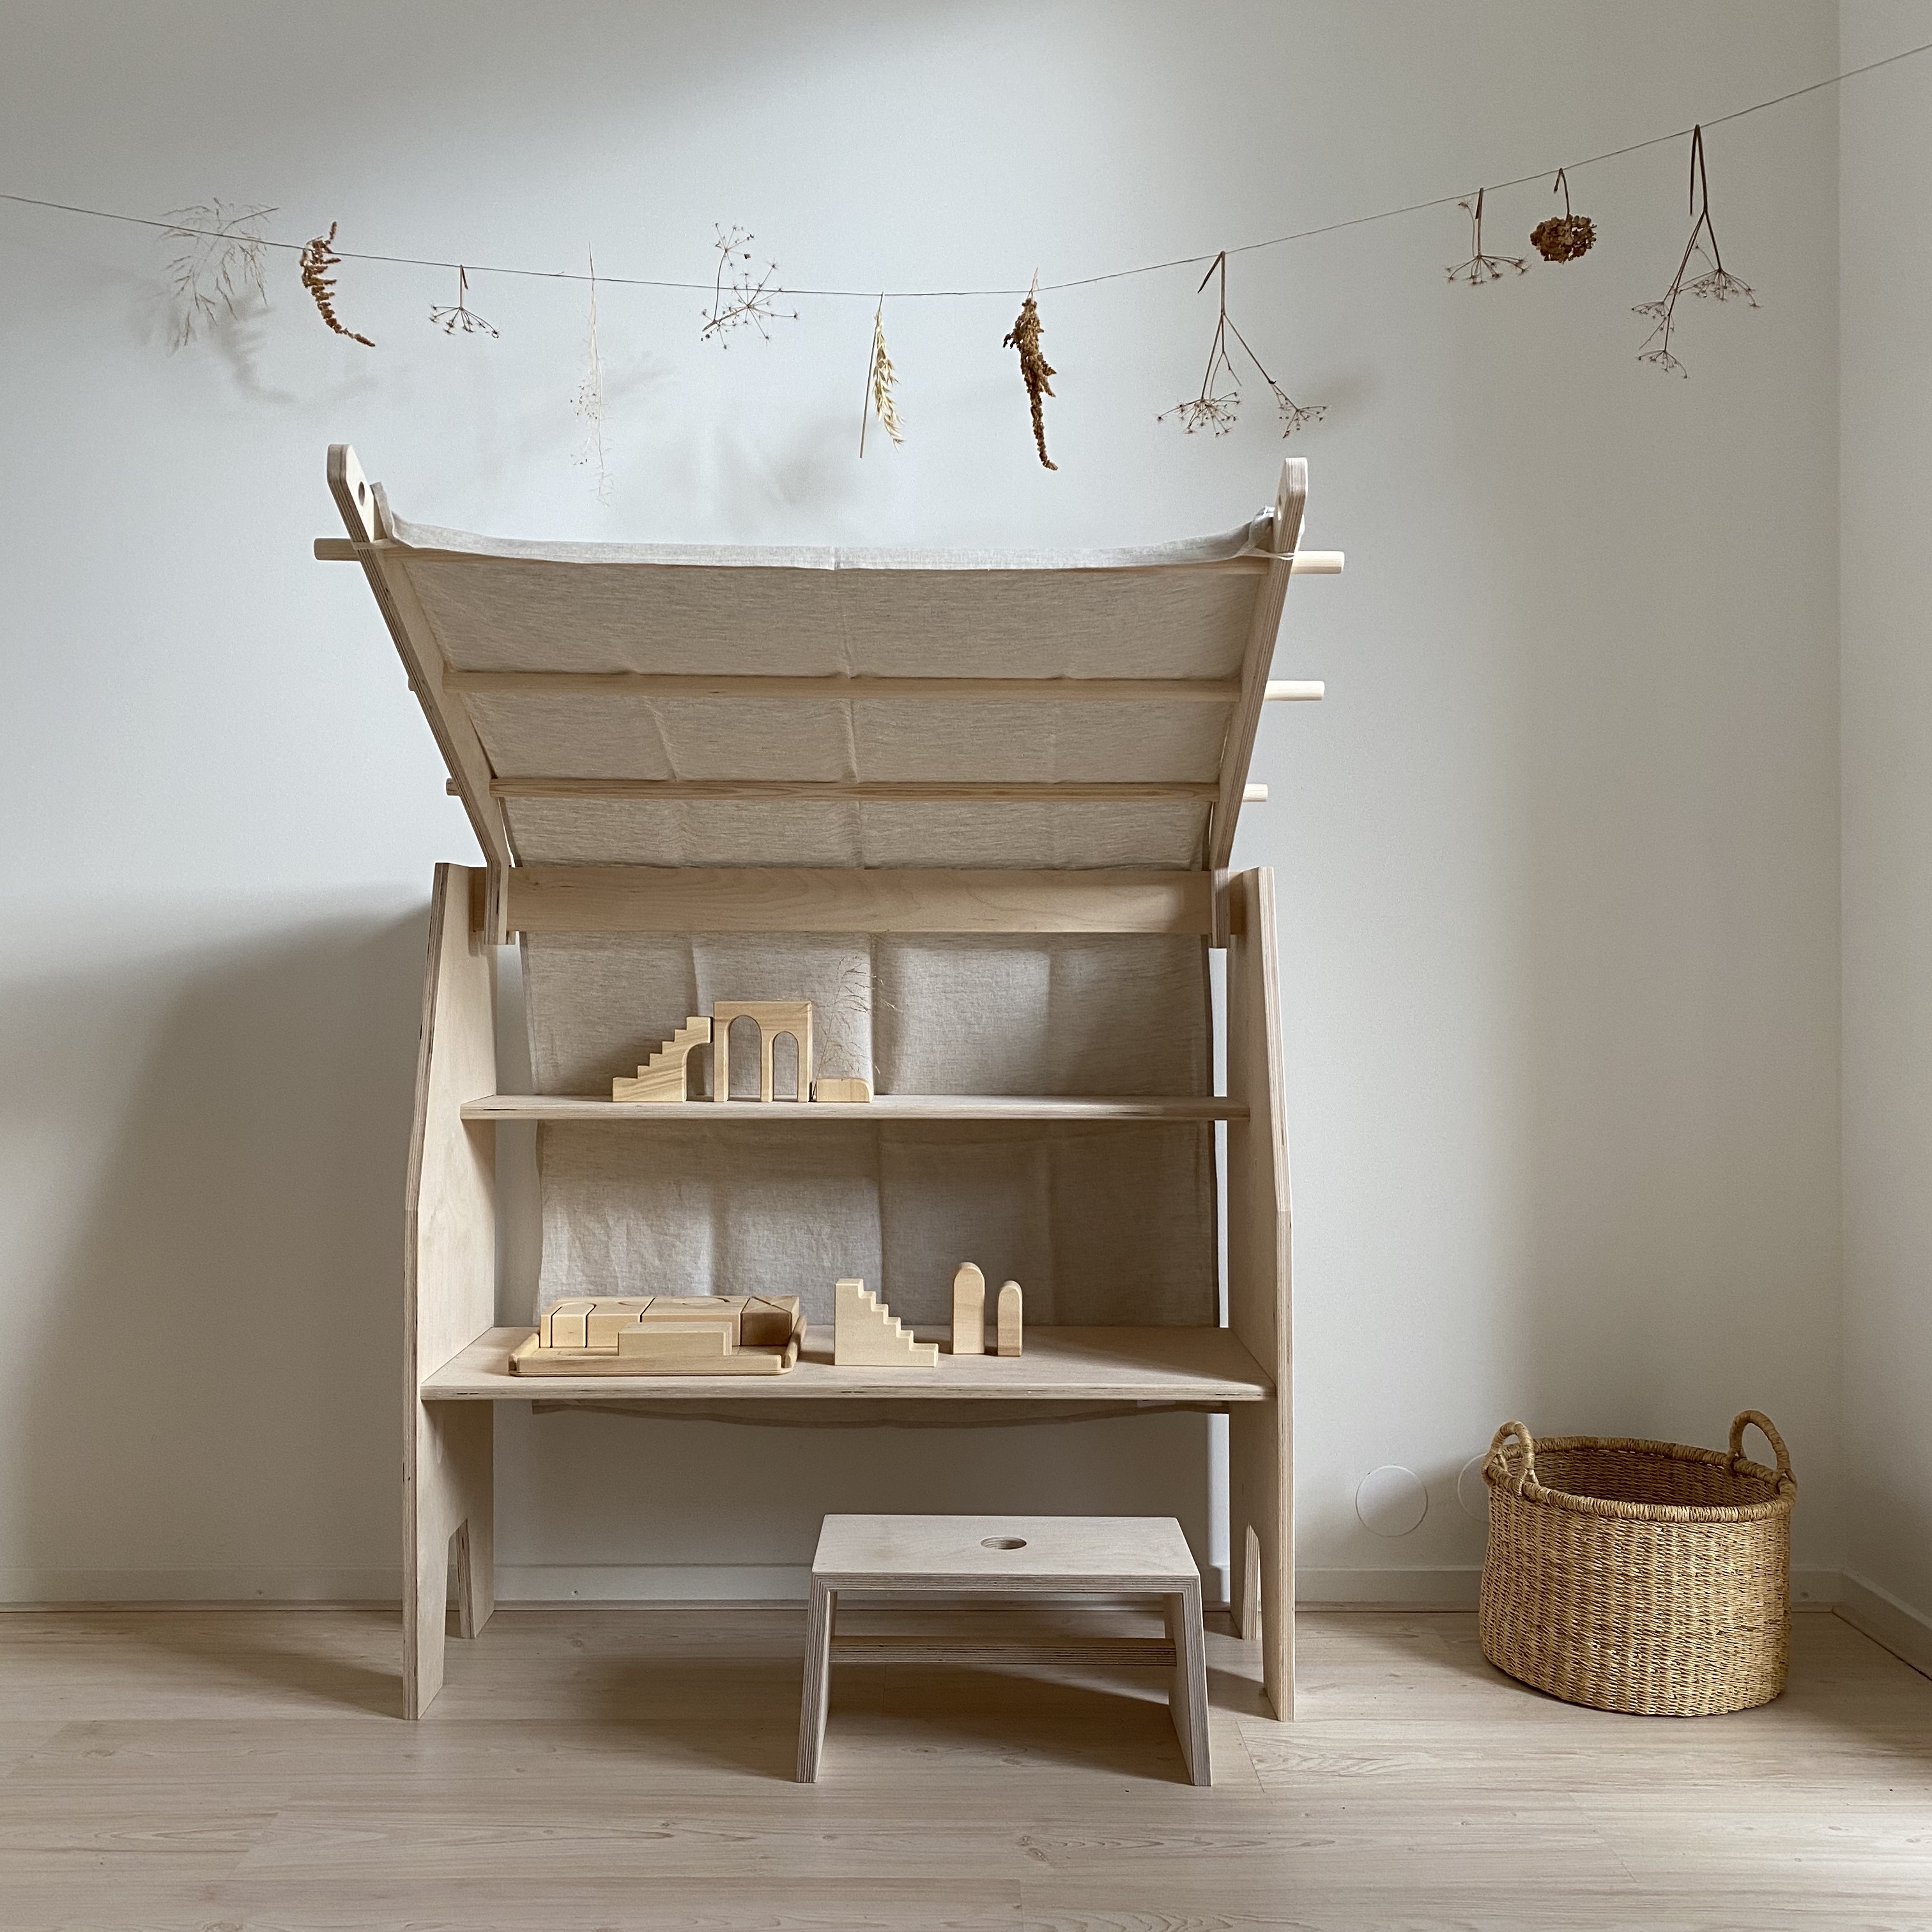 SHIZU playstand with roof and linen